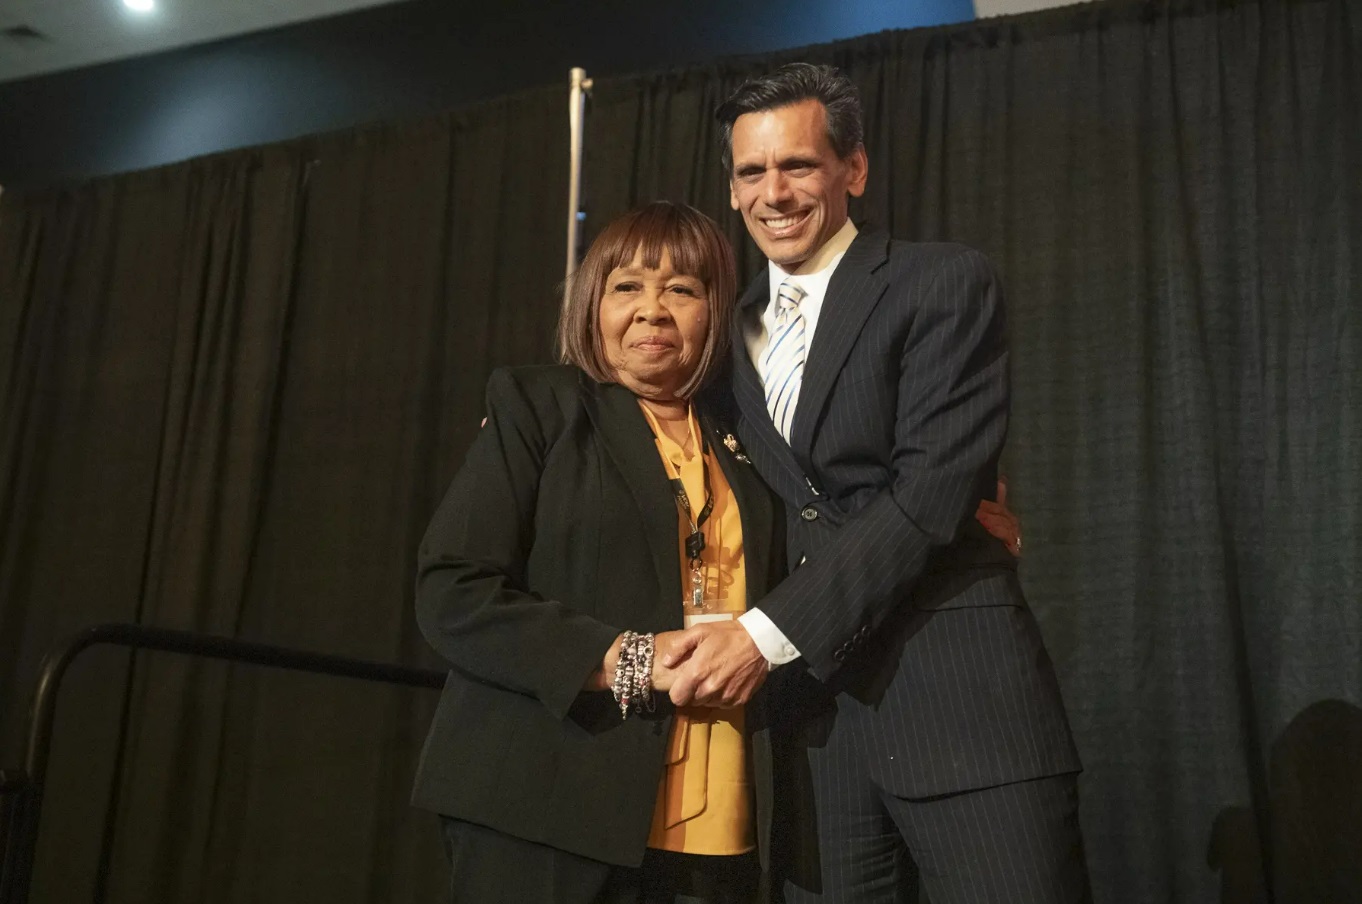 More than 2,700 VCU and VCU Health employees are honored for reaching service milestones